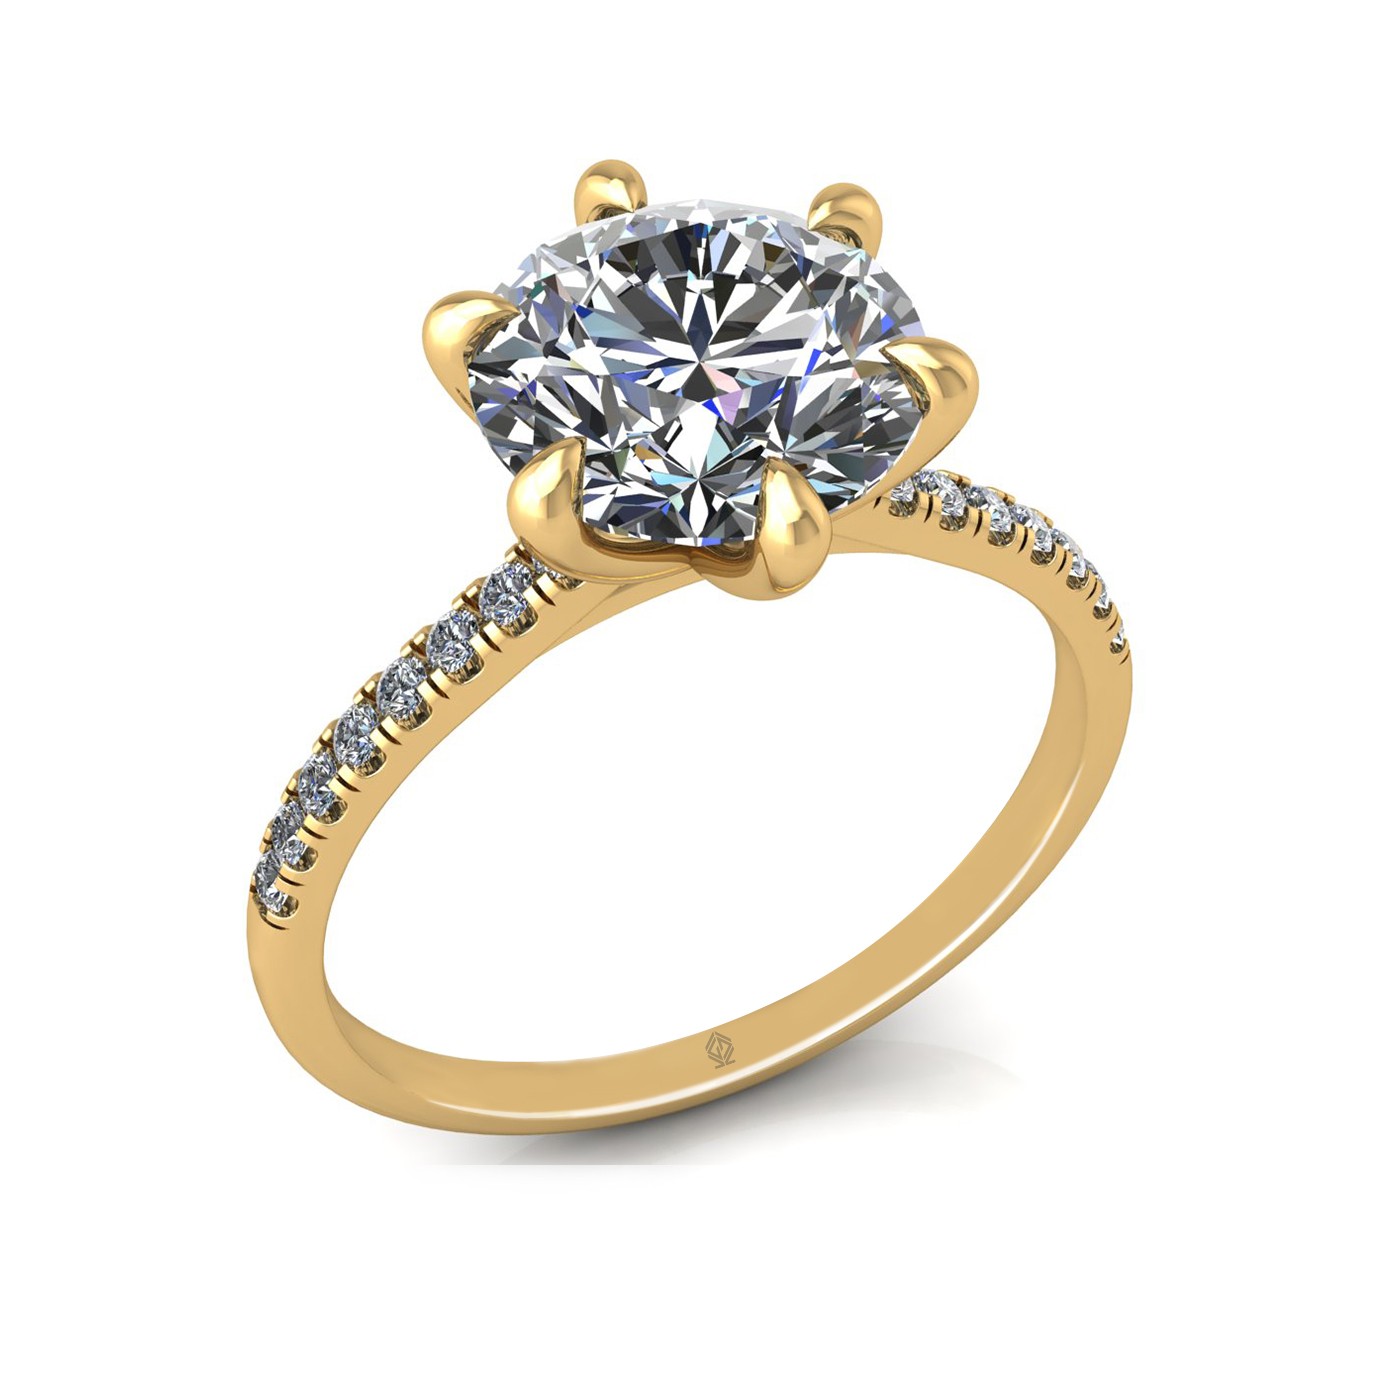 18k yellow gold 2,50 ct 6 prongs round cut diamond engagement ring with whisper thin pavÉ set band